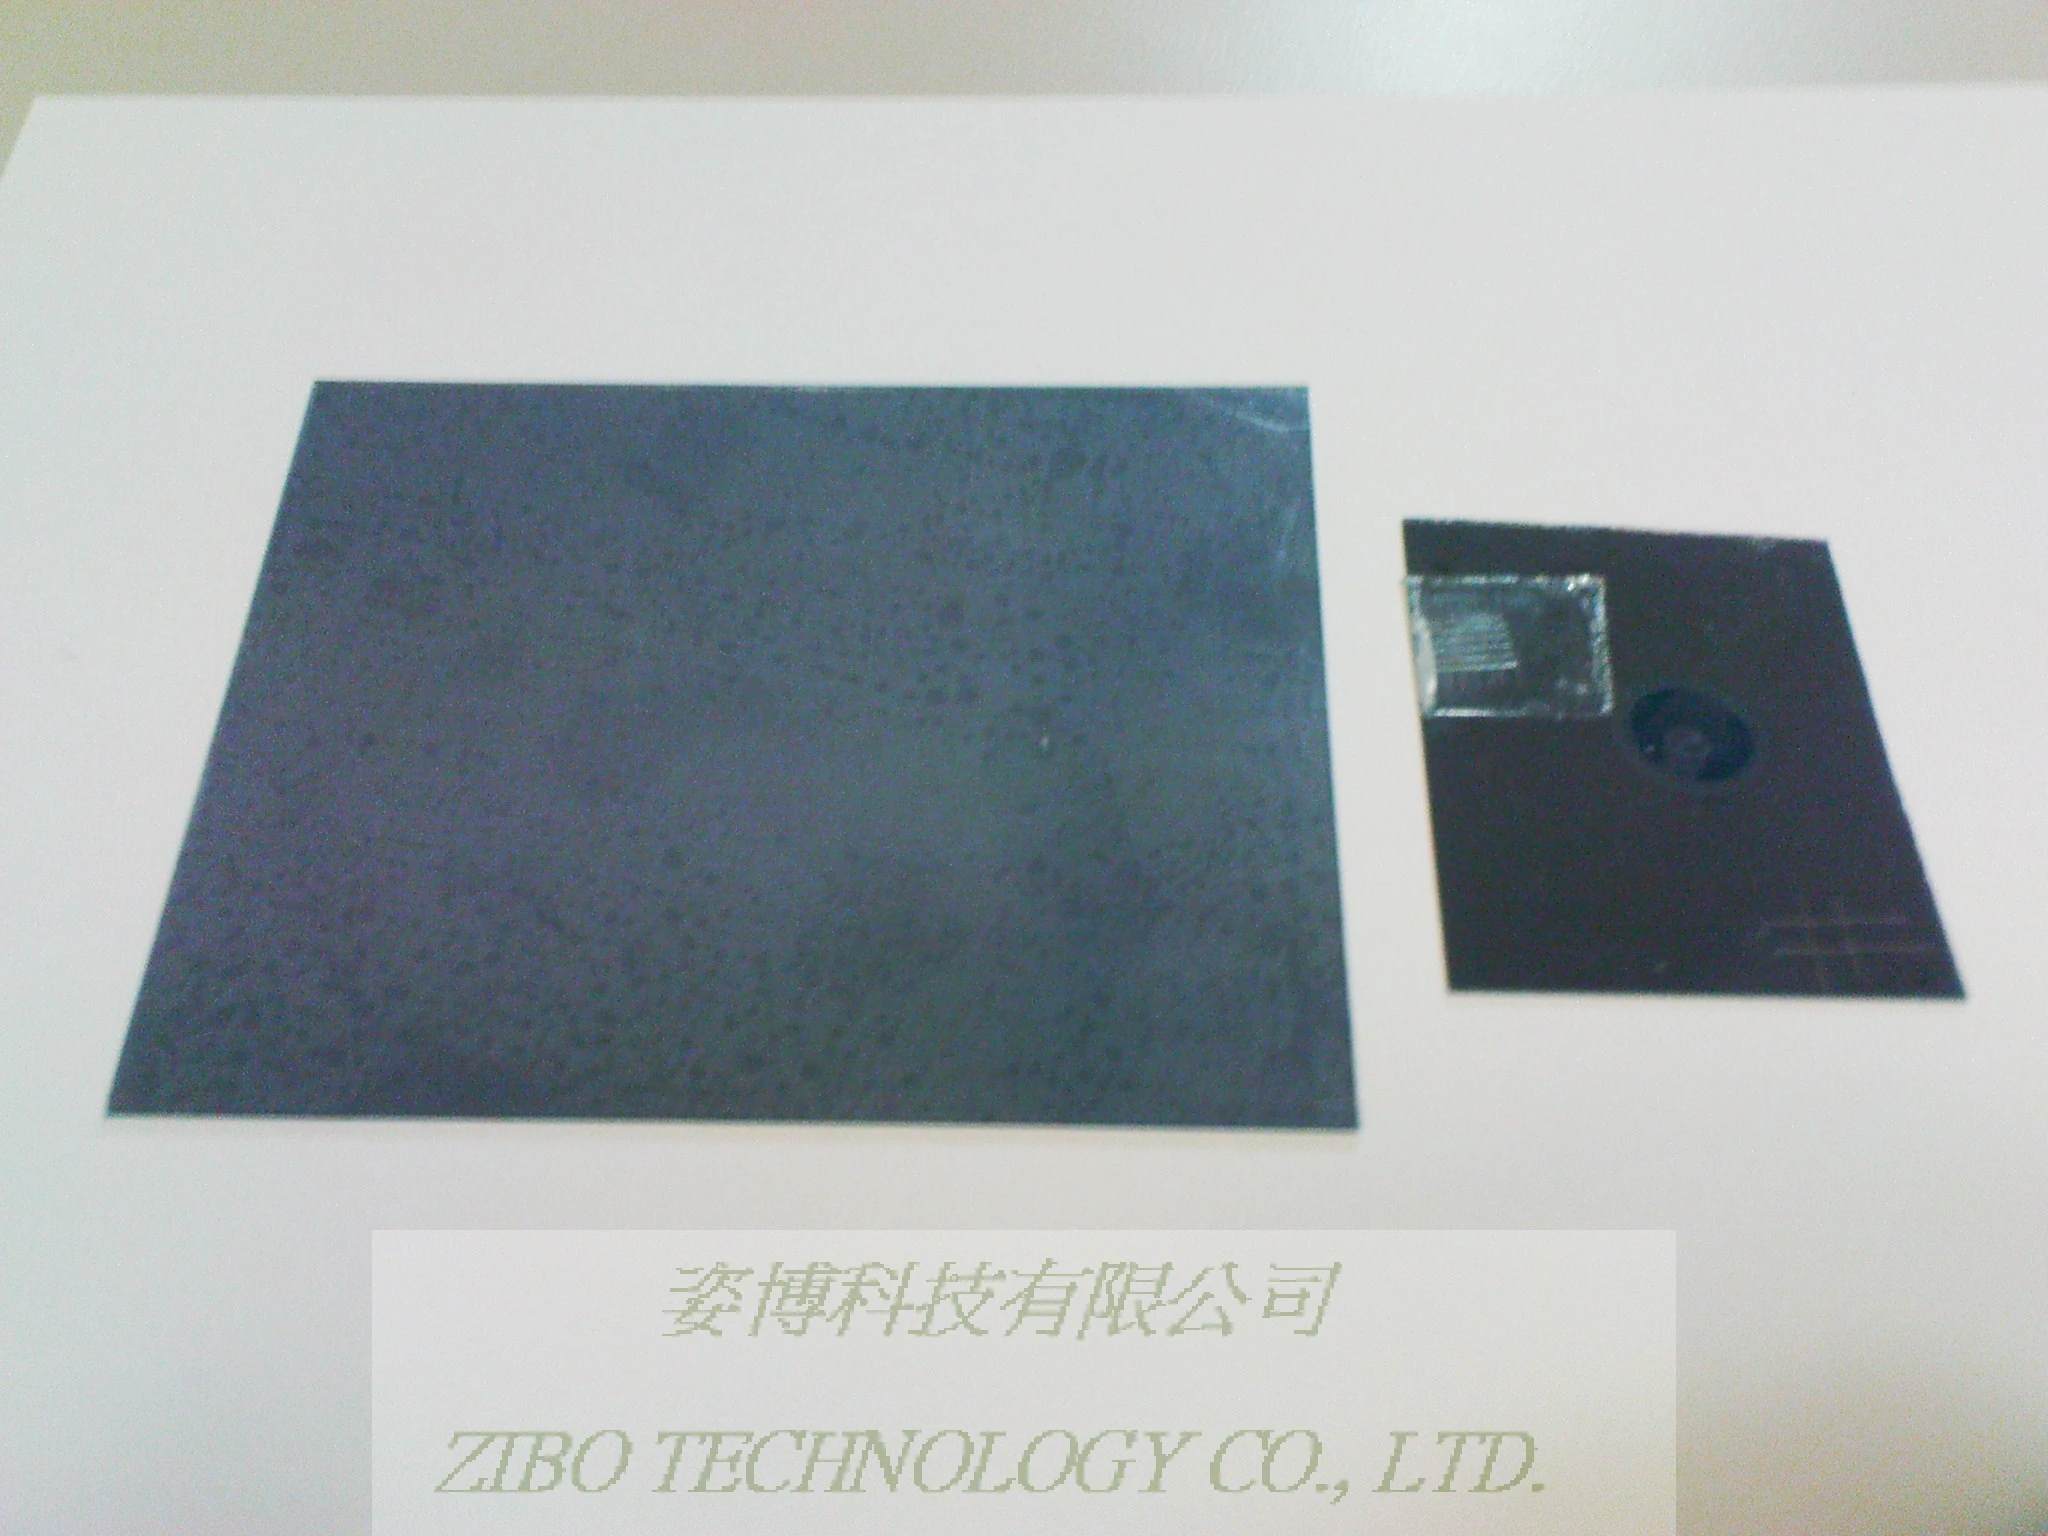 ND Filter for pmma & glass